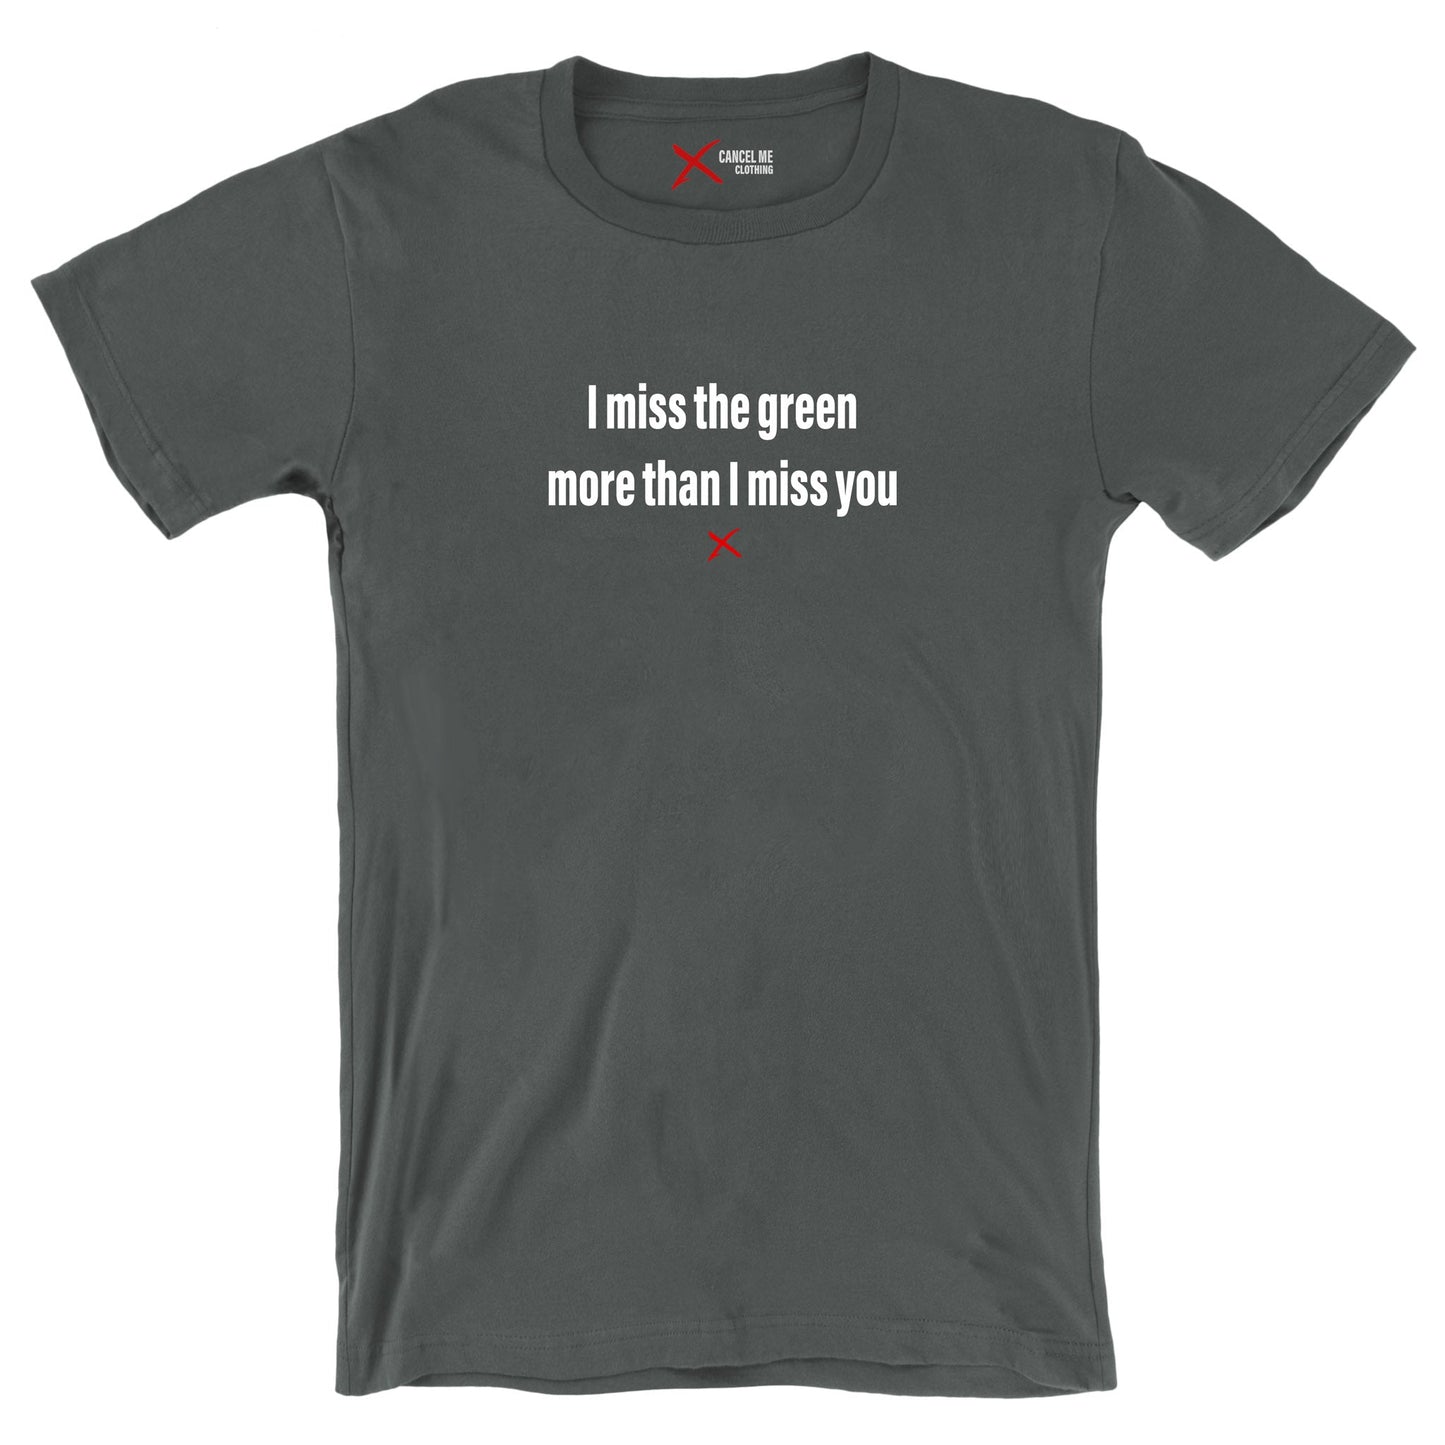 I miss the green more than I miss you - Shirt